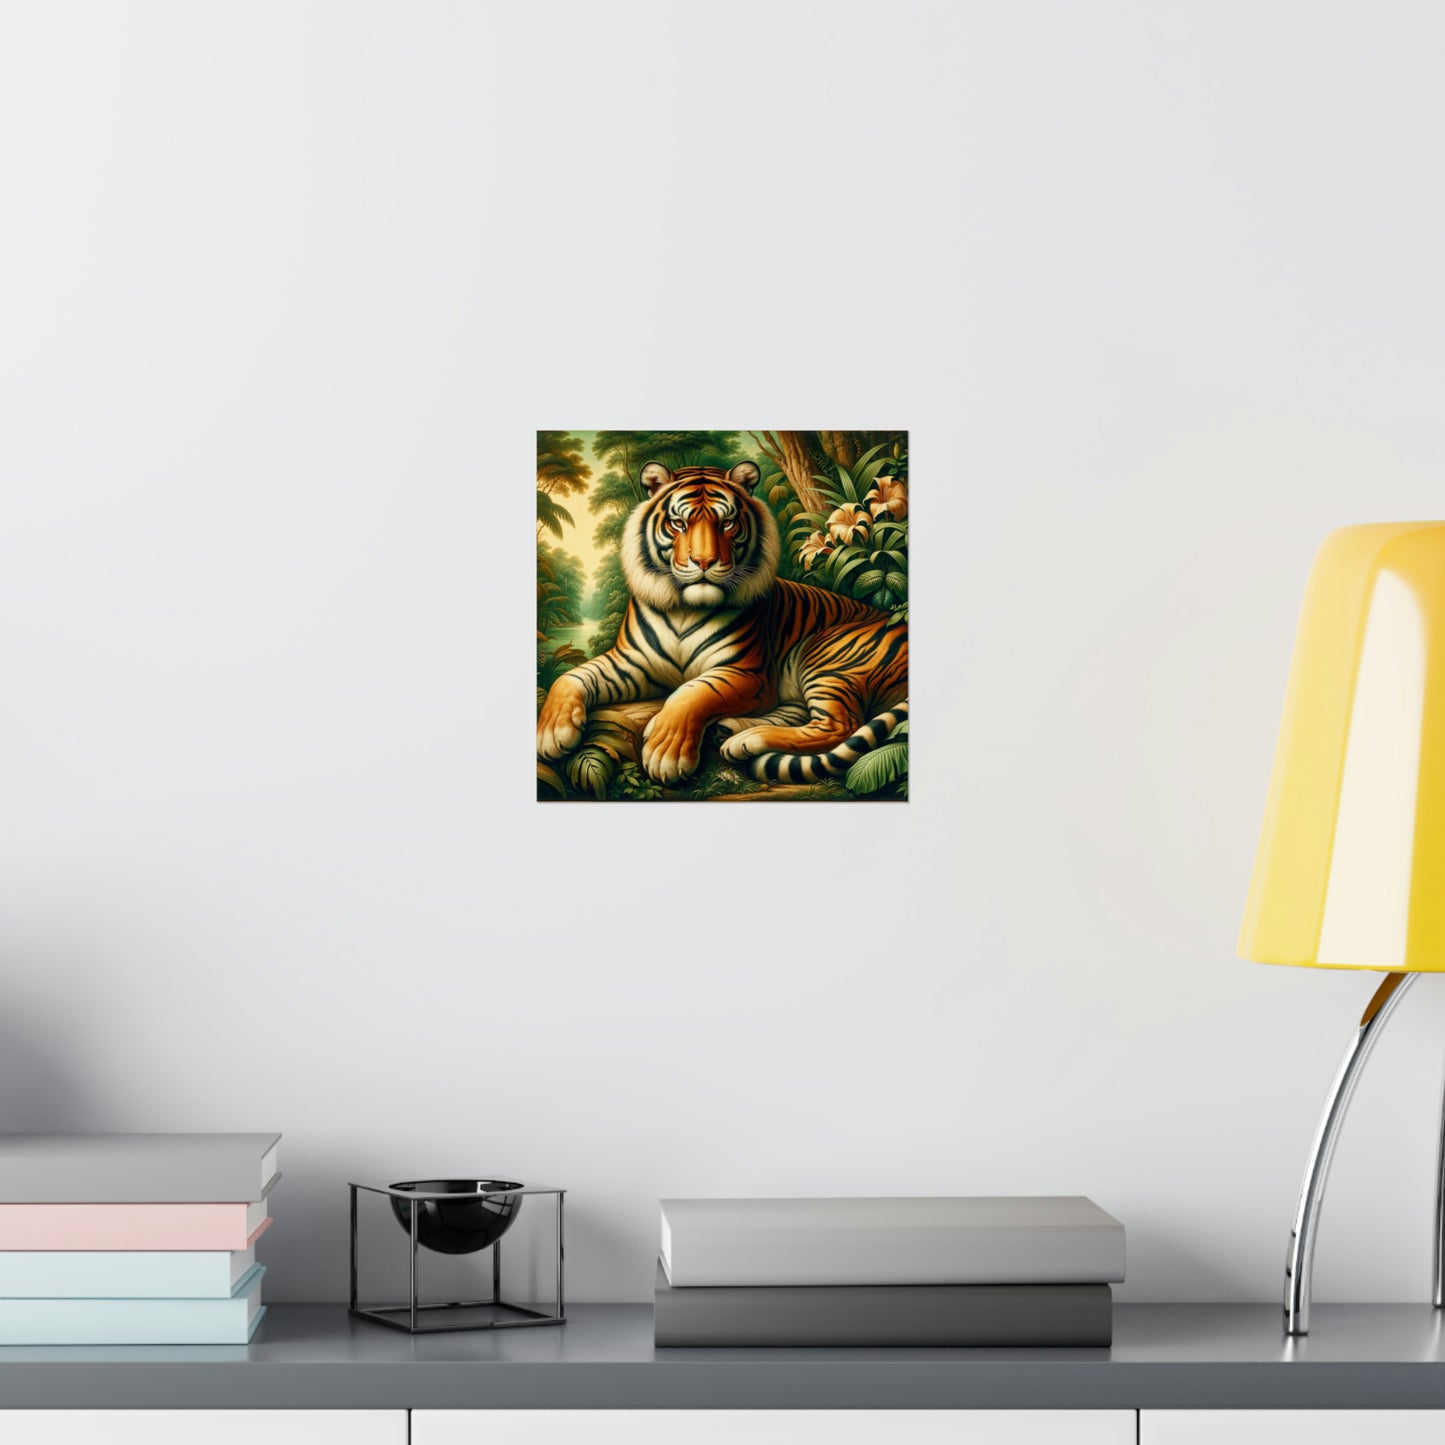 Tiger Painting Poster Print, Retro Vintage Jungle Wall Art Square Paper Artwork Small Large Cool Room Office Decor Hanging